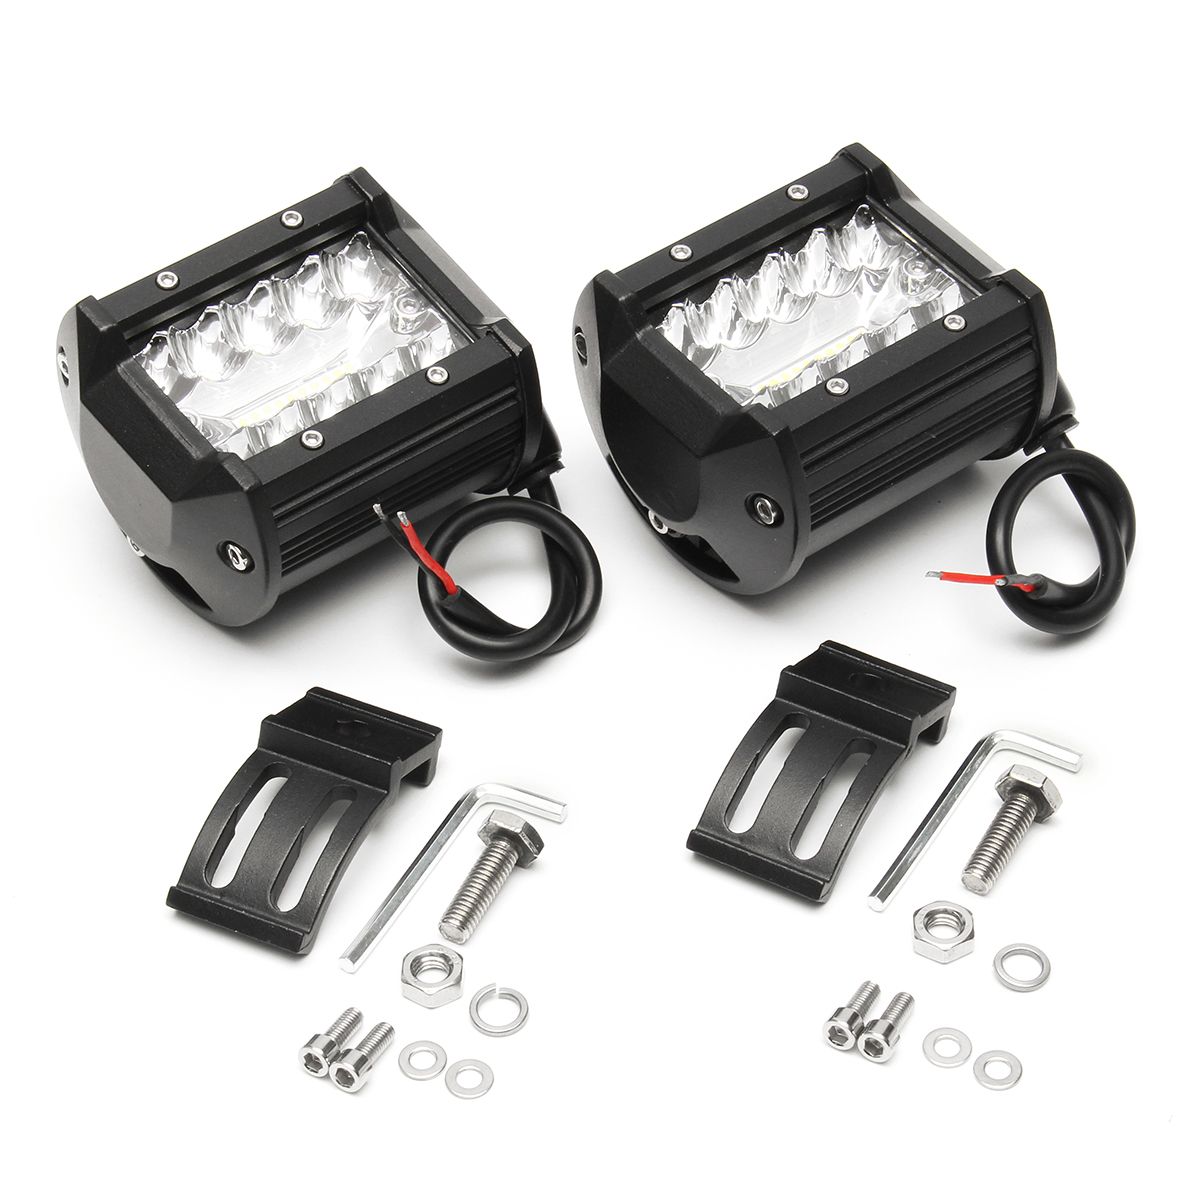 2PCS-Tri-Row-4Inch-60W-LED-Work-Light-Bars-Combo-Beam-Driving-Fog-Lamp-Pure-White-6000K-for-Off-Road-1301873